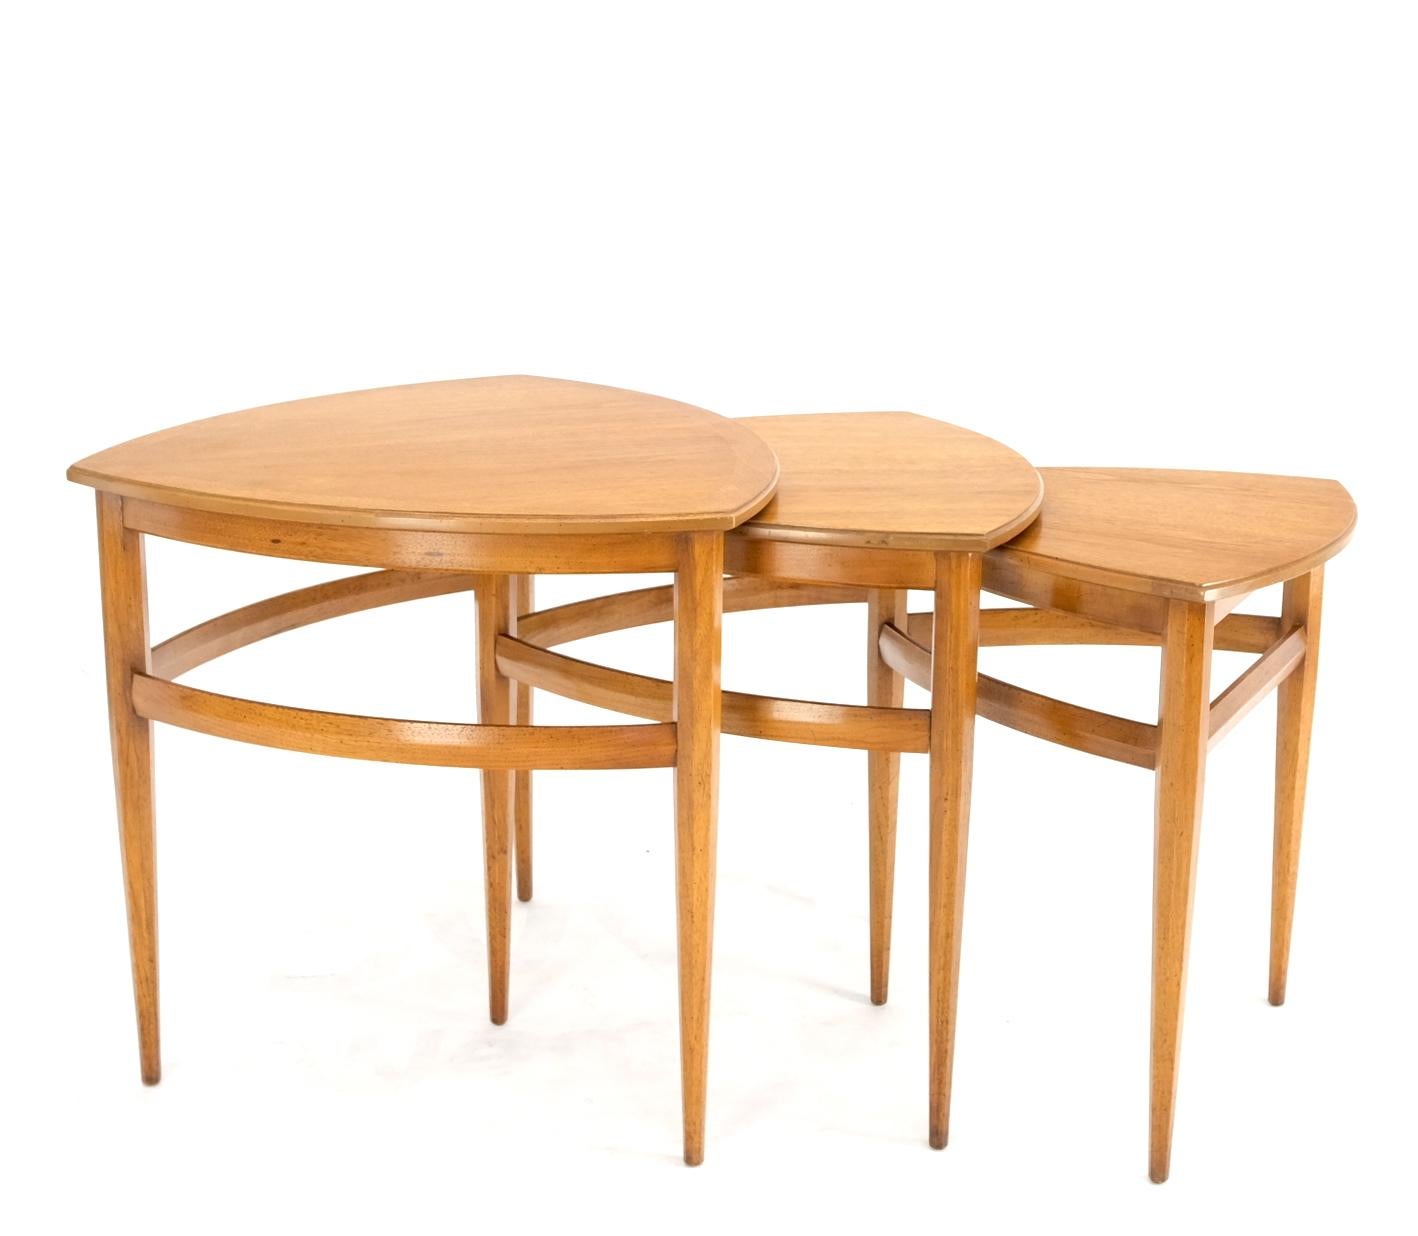 Set of 3 Mid-Century Modern light walnut three rounded triangle shape nesting stacking tables.